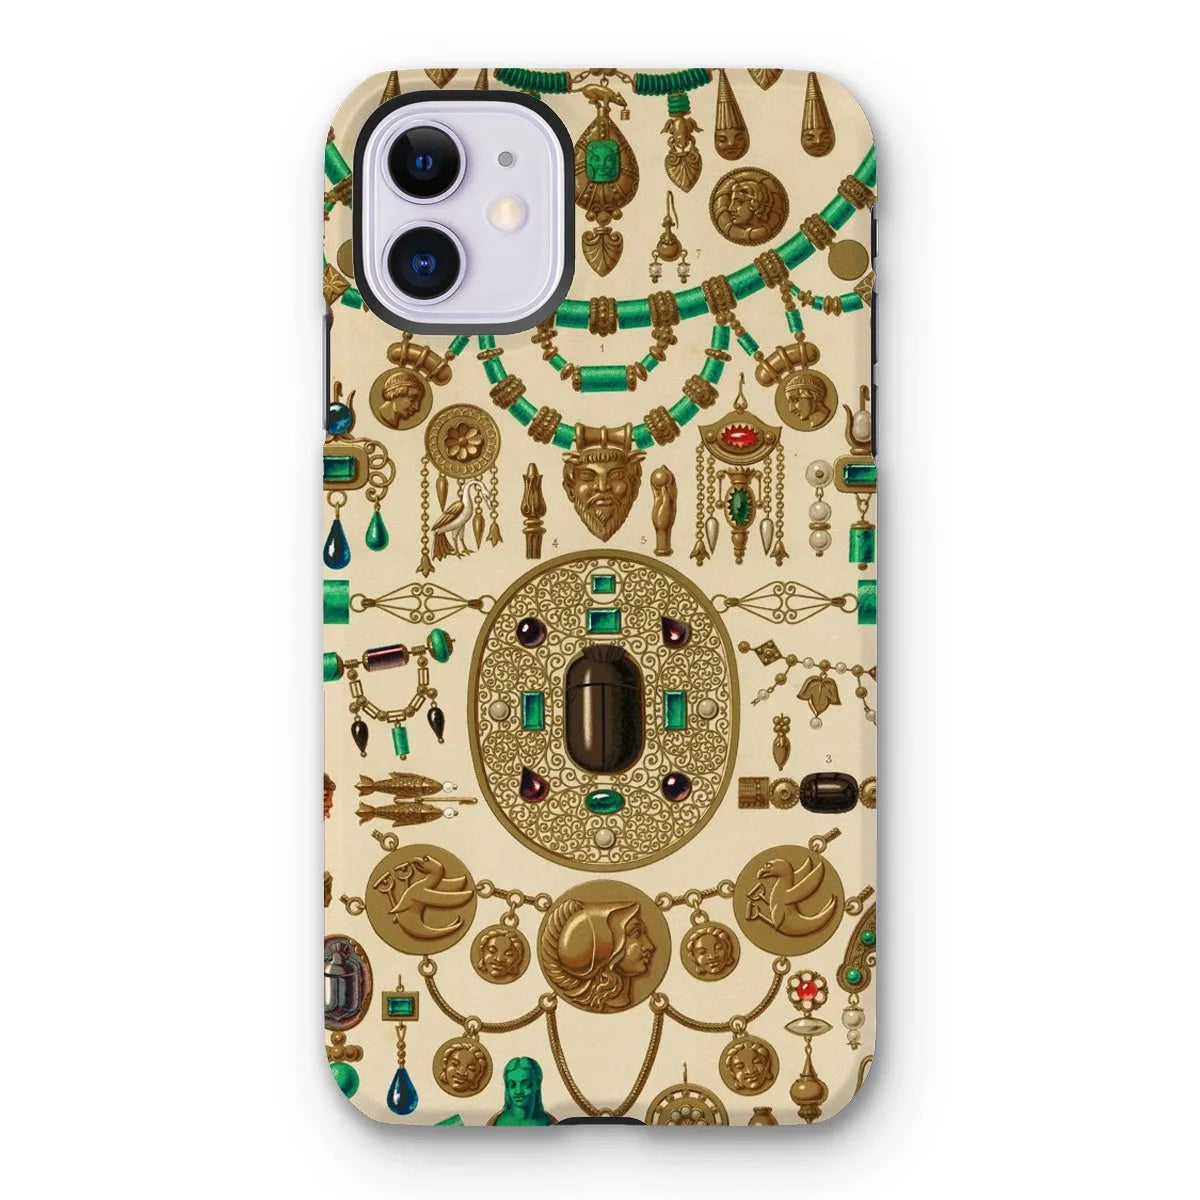 Etruscan Patterns From L’ornement Polychrome By Auguste Racinet Tough Phone Case - Iphone 11 / Matte - Mobile Phone